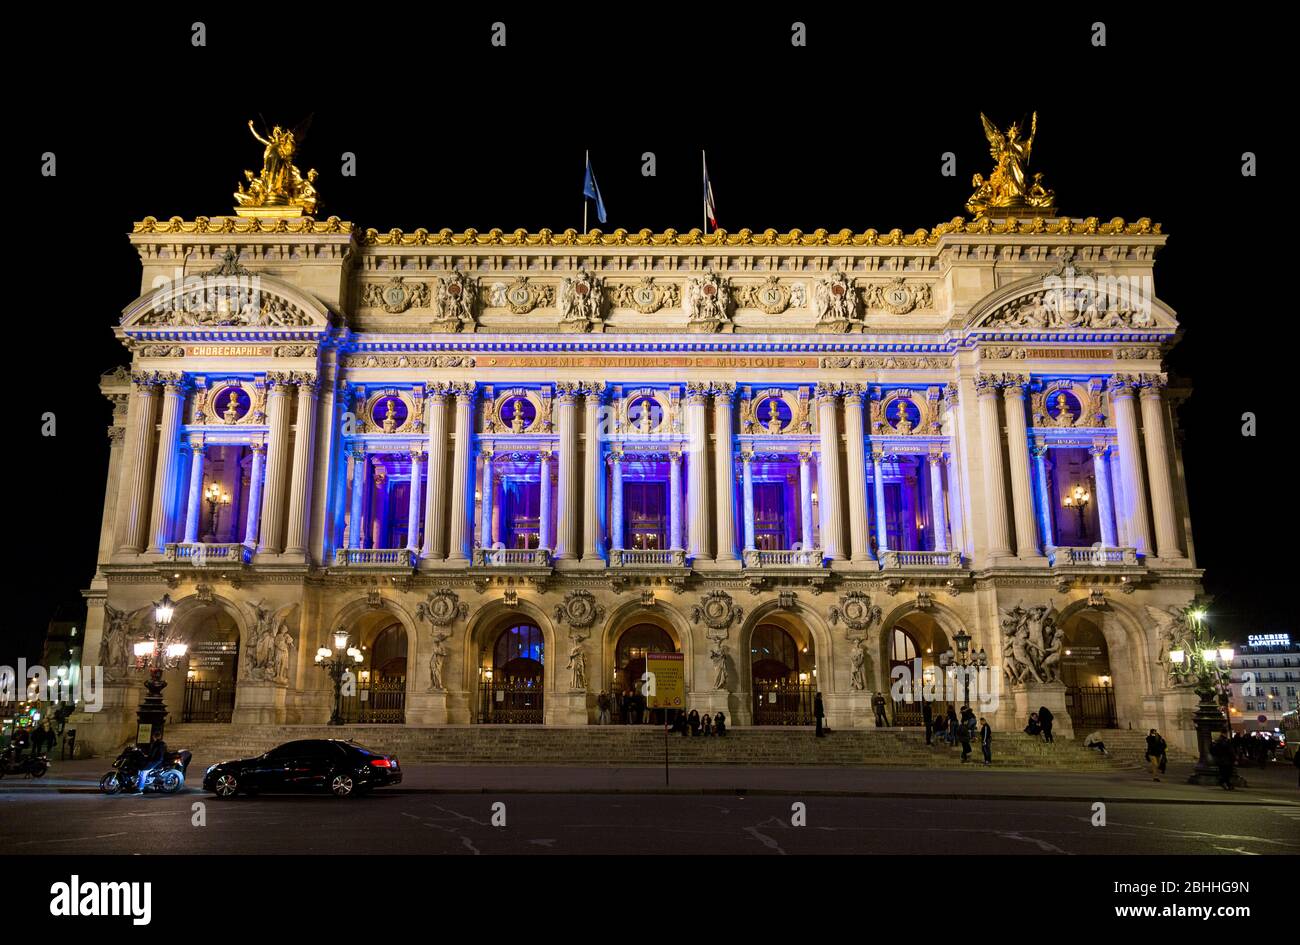 Paris, France - 2nd March 2015The Paris Opera House, known as The Opera Garnier, illumated during the evening performance. Stock Photo